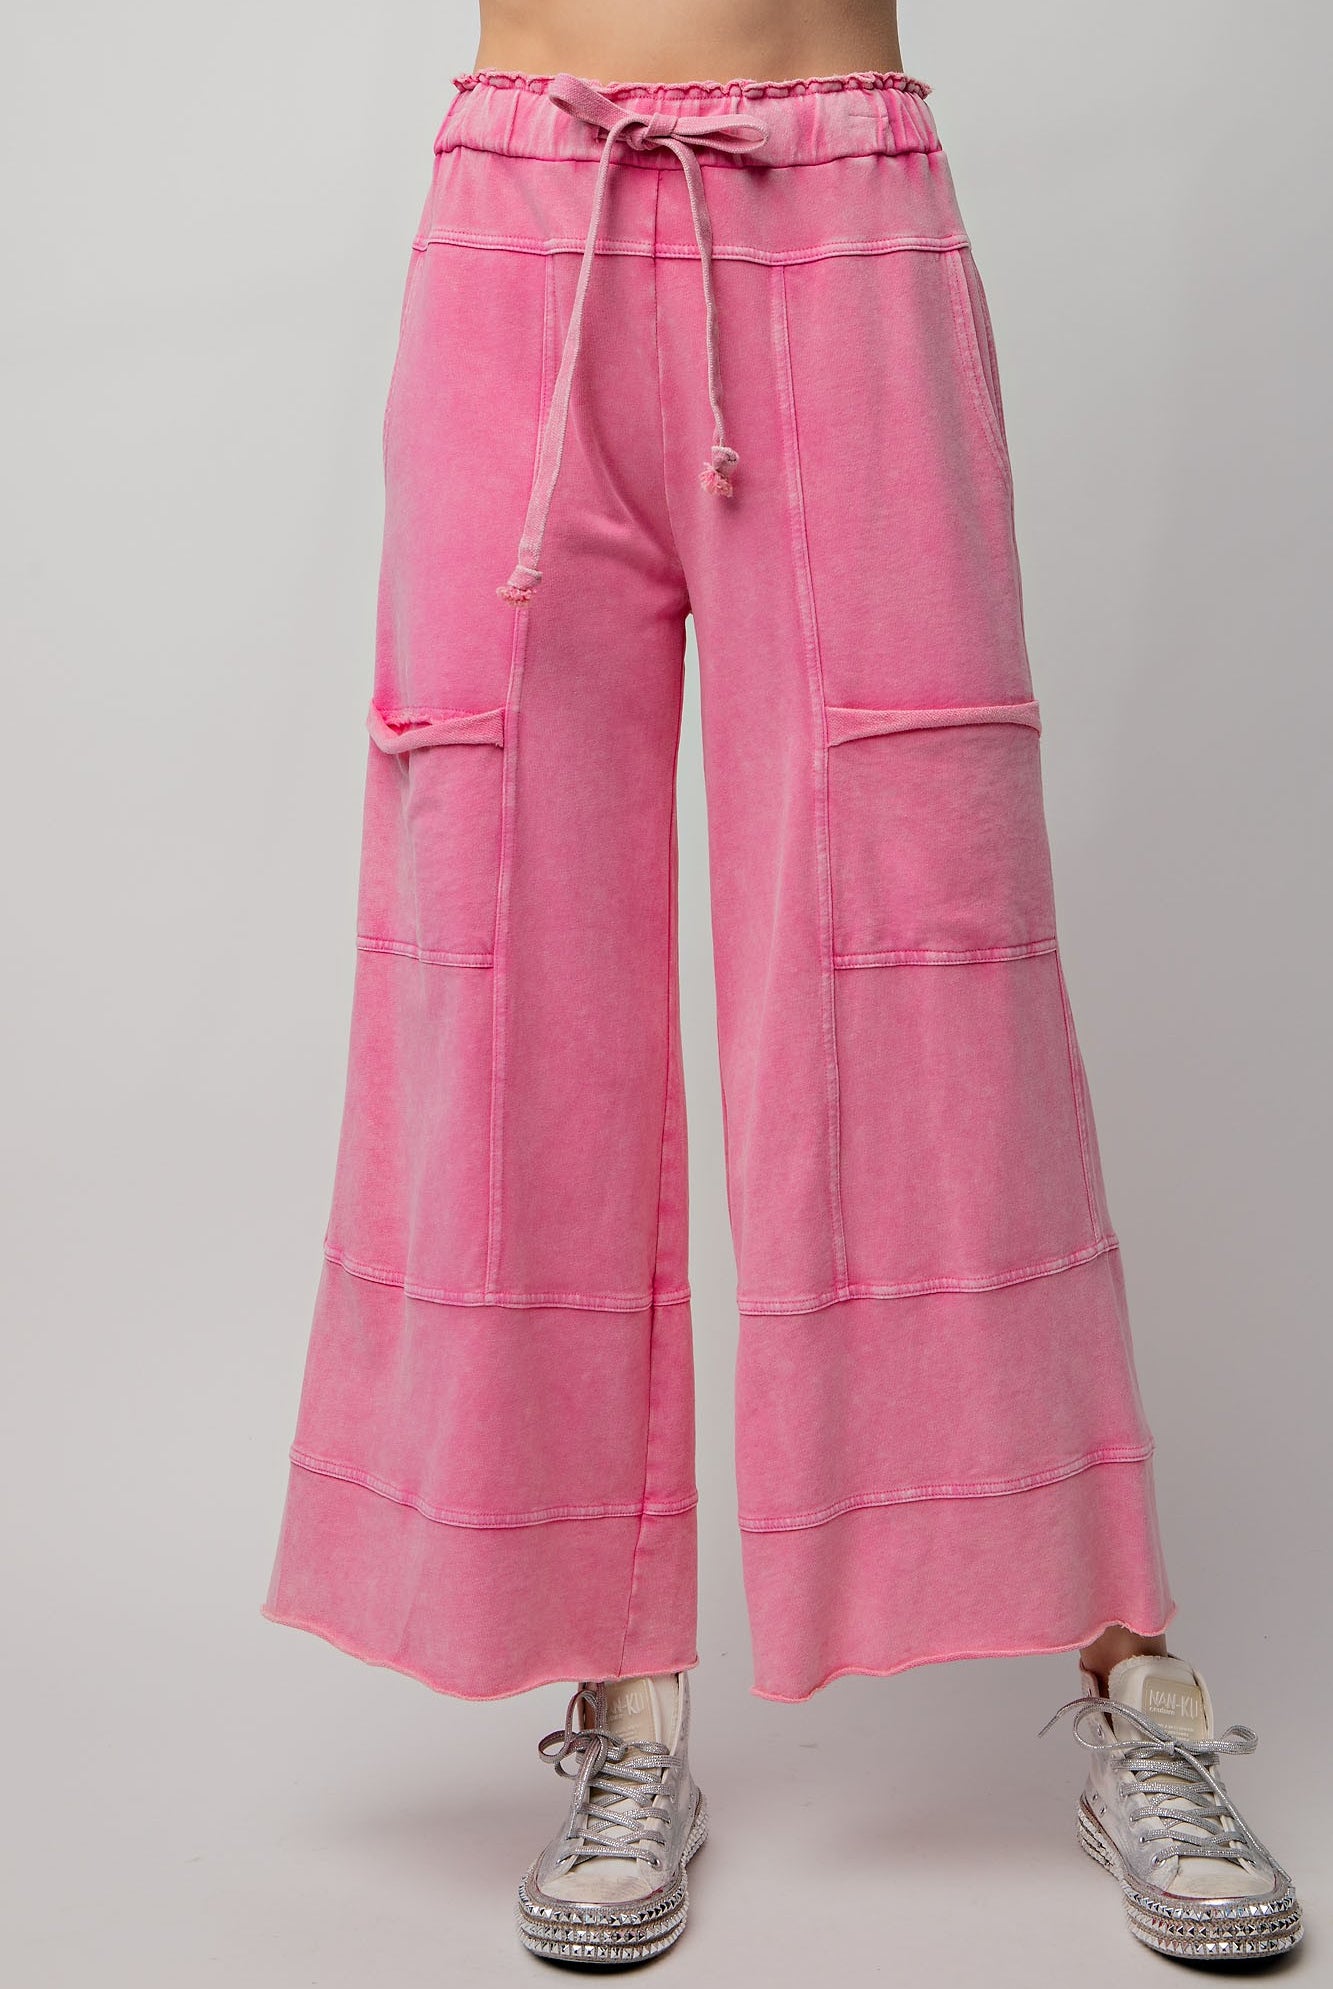 SPRING 2024 Bradley Mineral Washed Terry Knit Wide Leg Pants - Be You Boutique